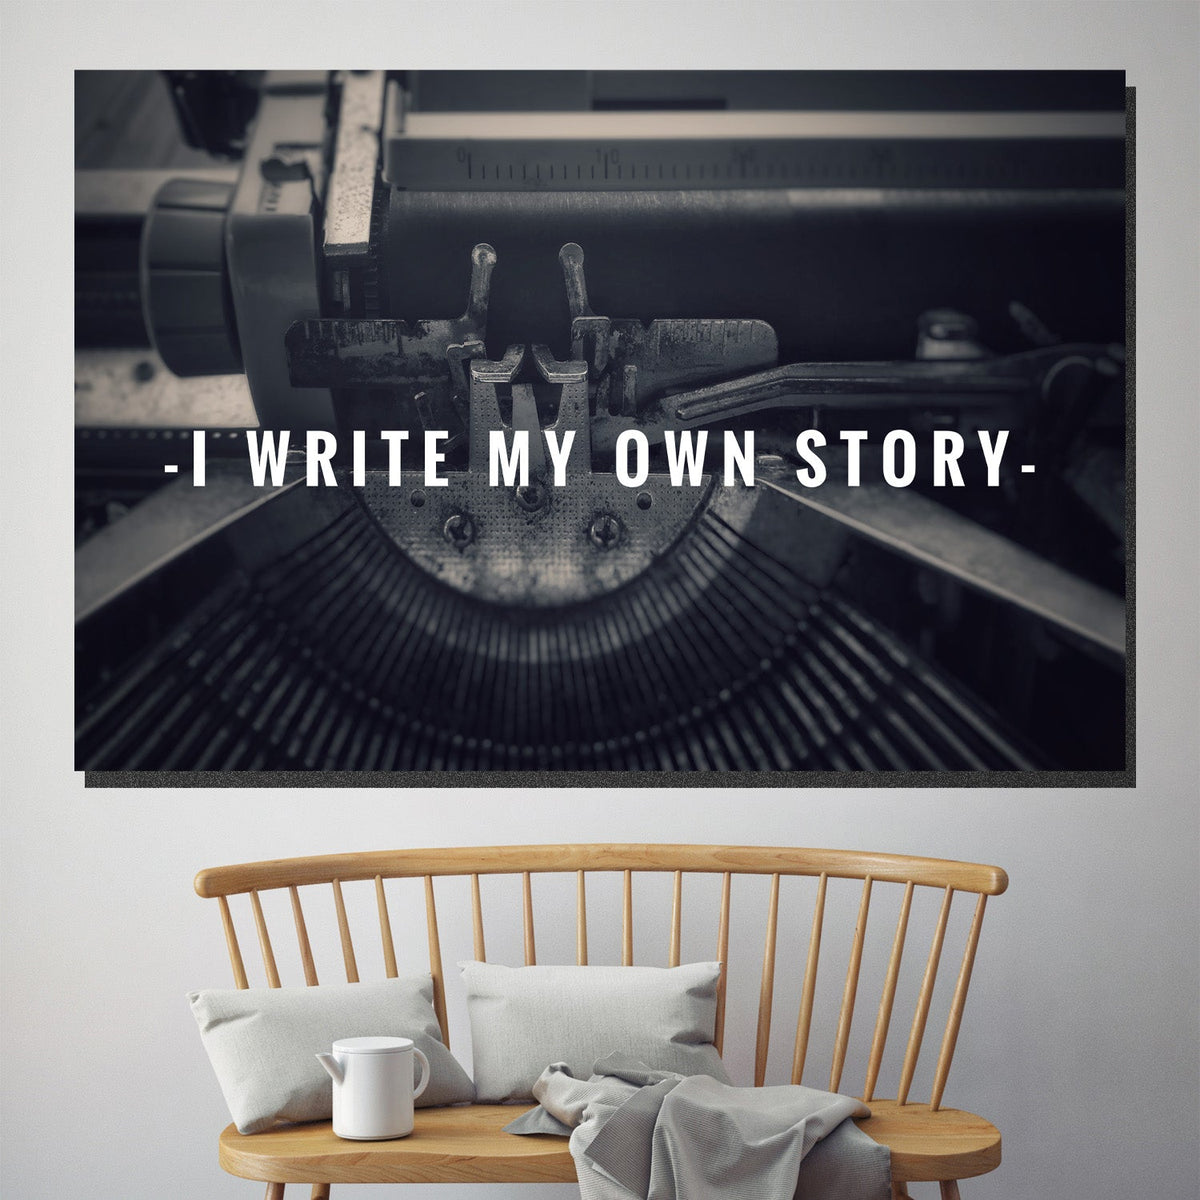 https://cdn.shopify.com/s/files/1/0387/9986/8044/products/IWriteMyOwnStoryCanvasArtprintStretched-4.jpg